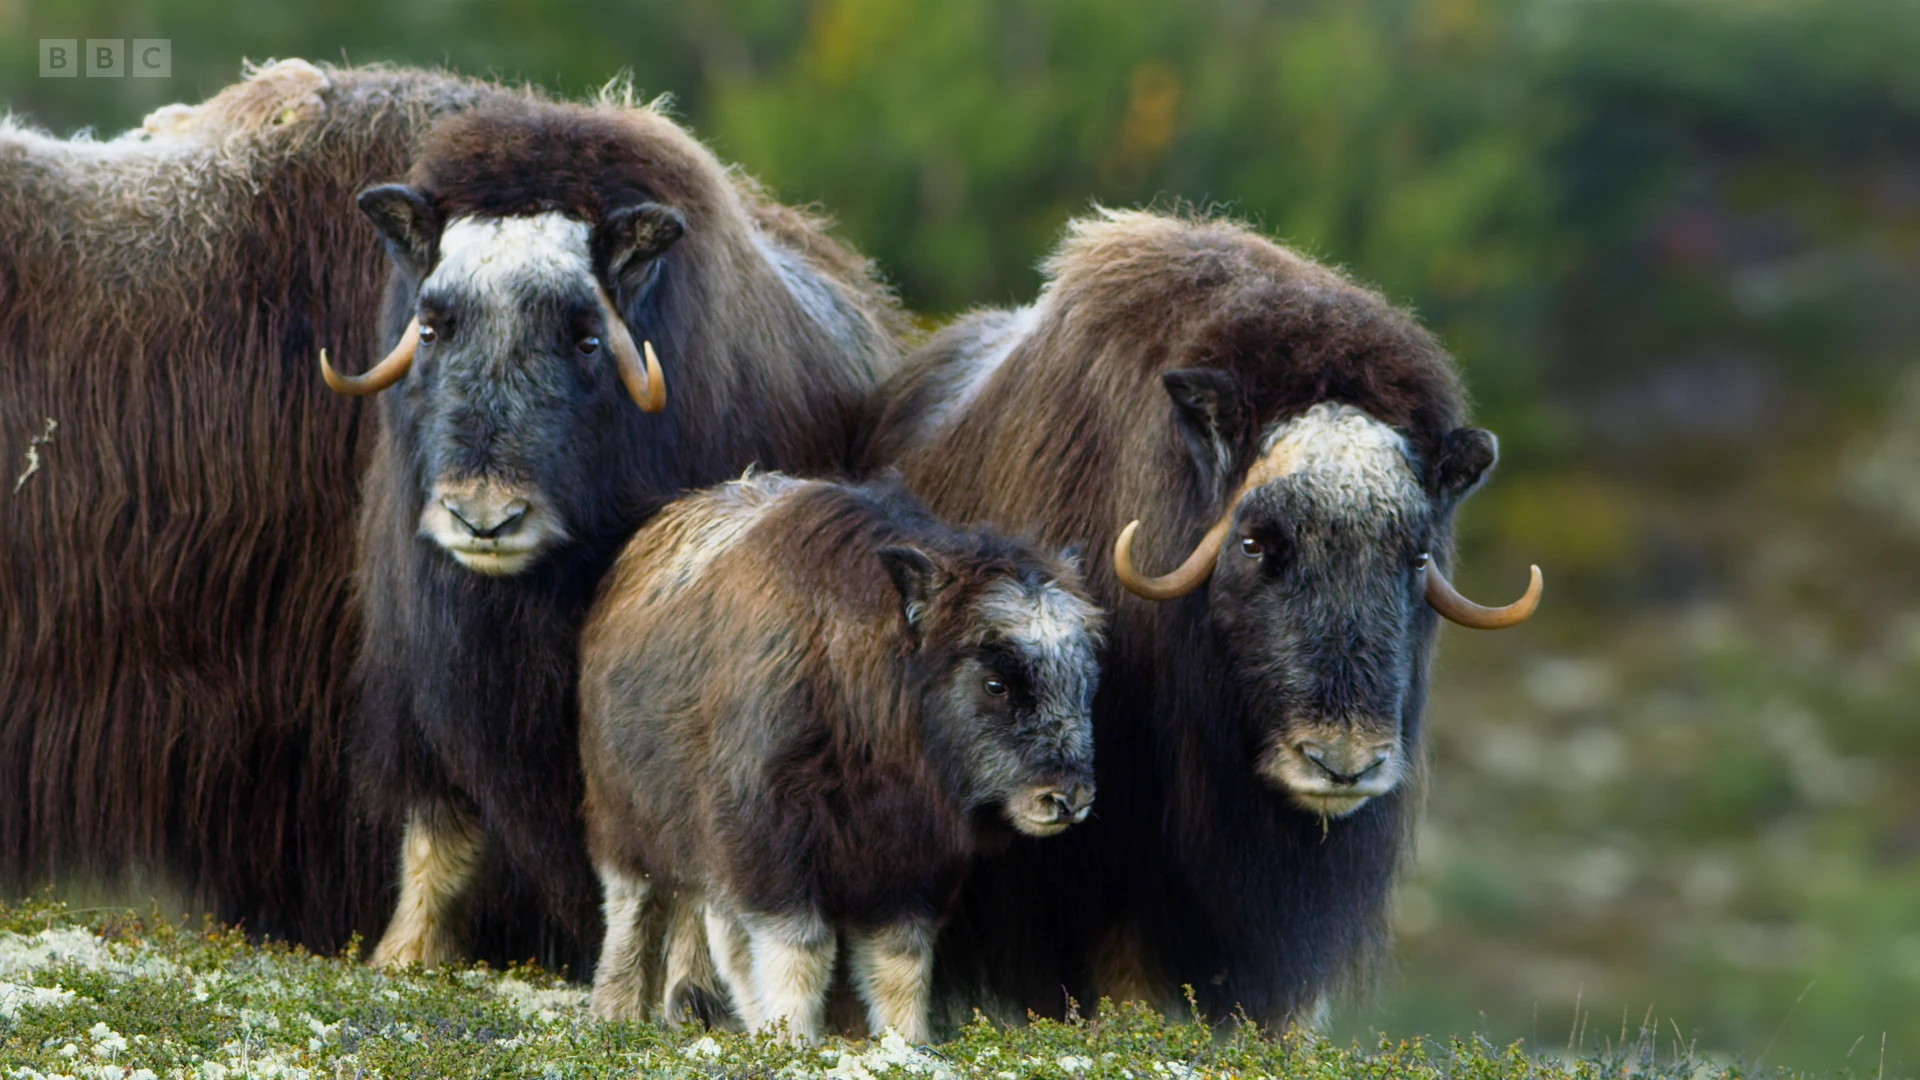 Muskox (Ovibos moschatus) as shown in Seven Worlds, One Planet - Europe